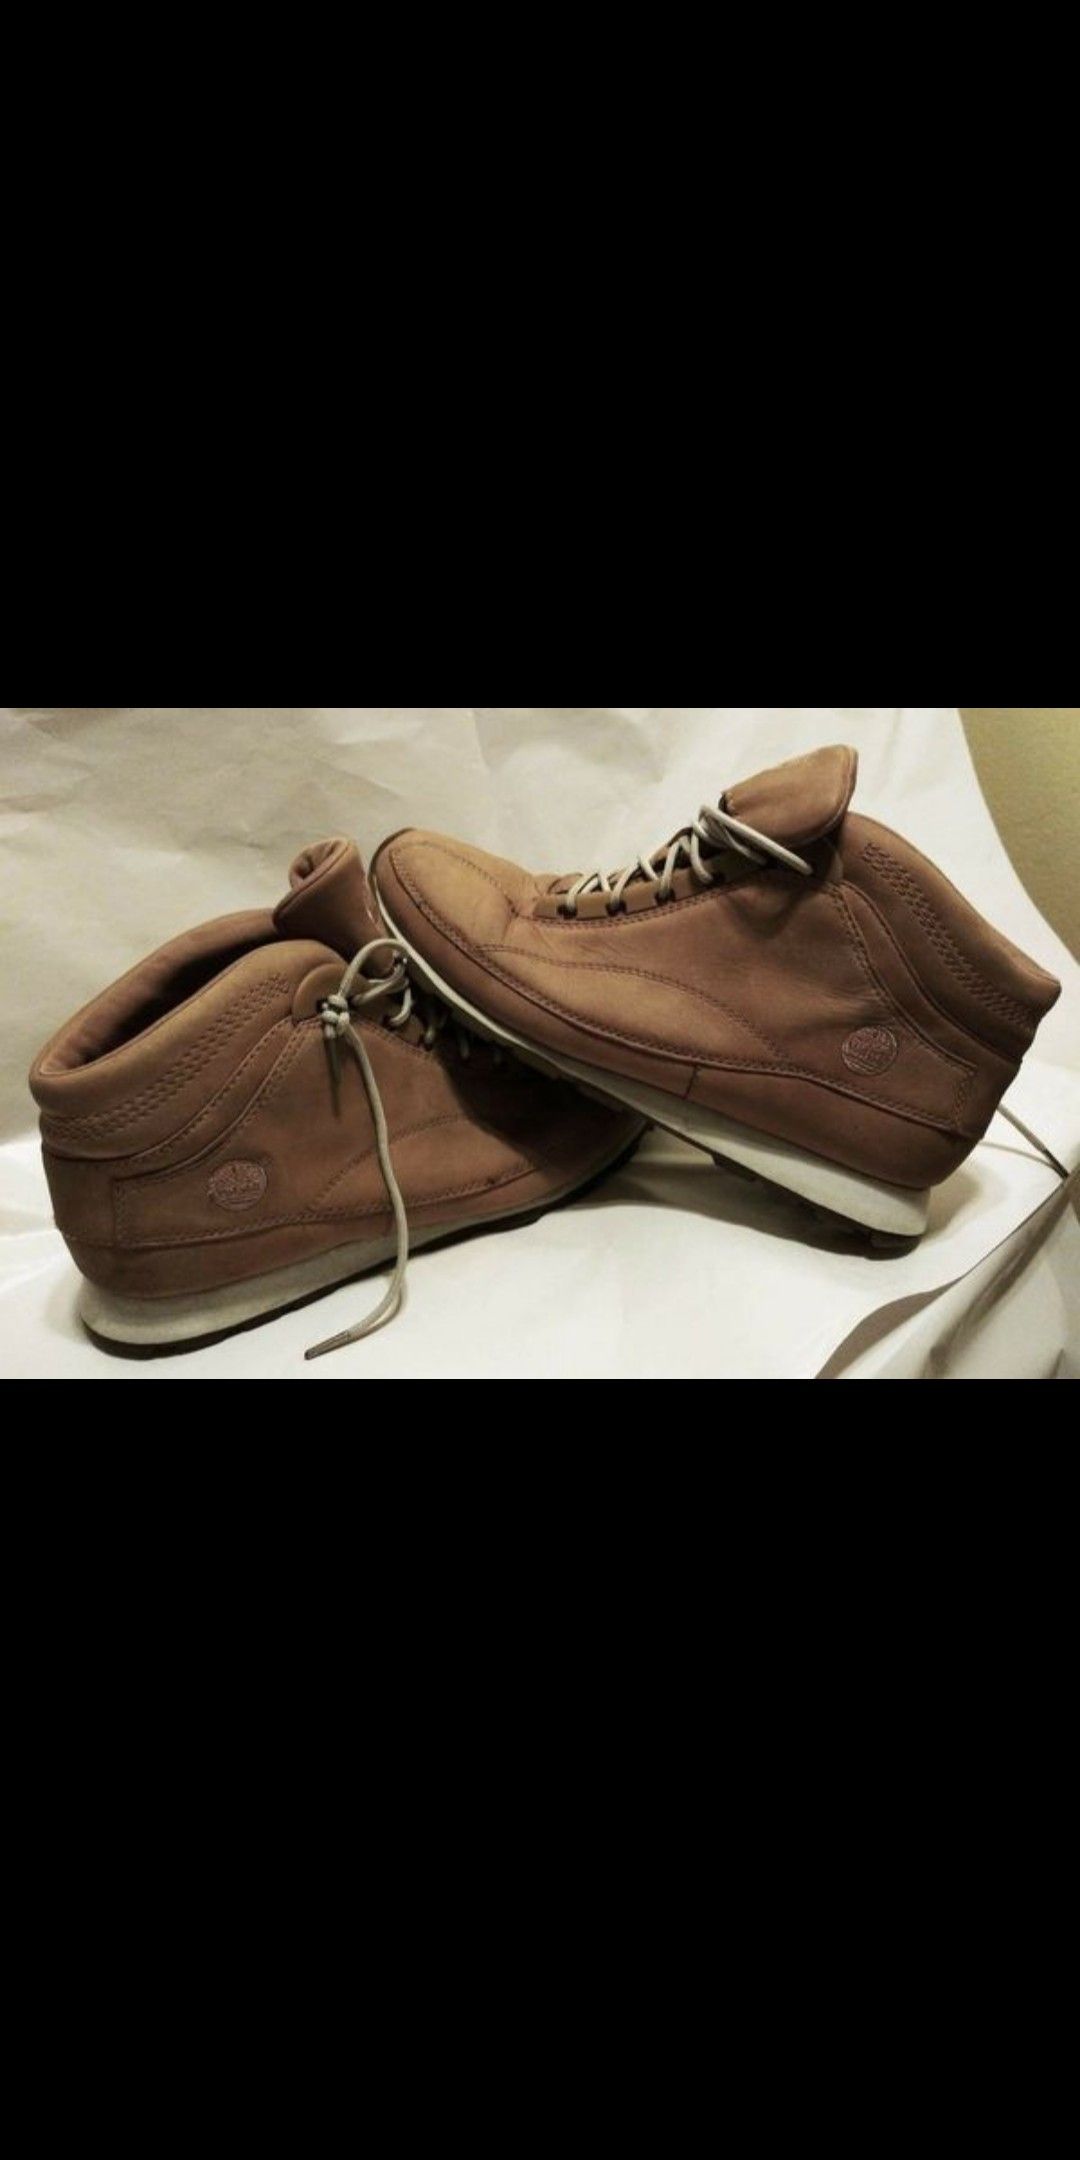 Timberland tan brown leather Trail Seeker boots size 9 1/2